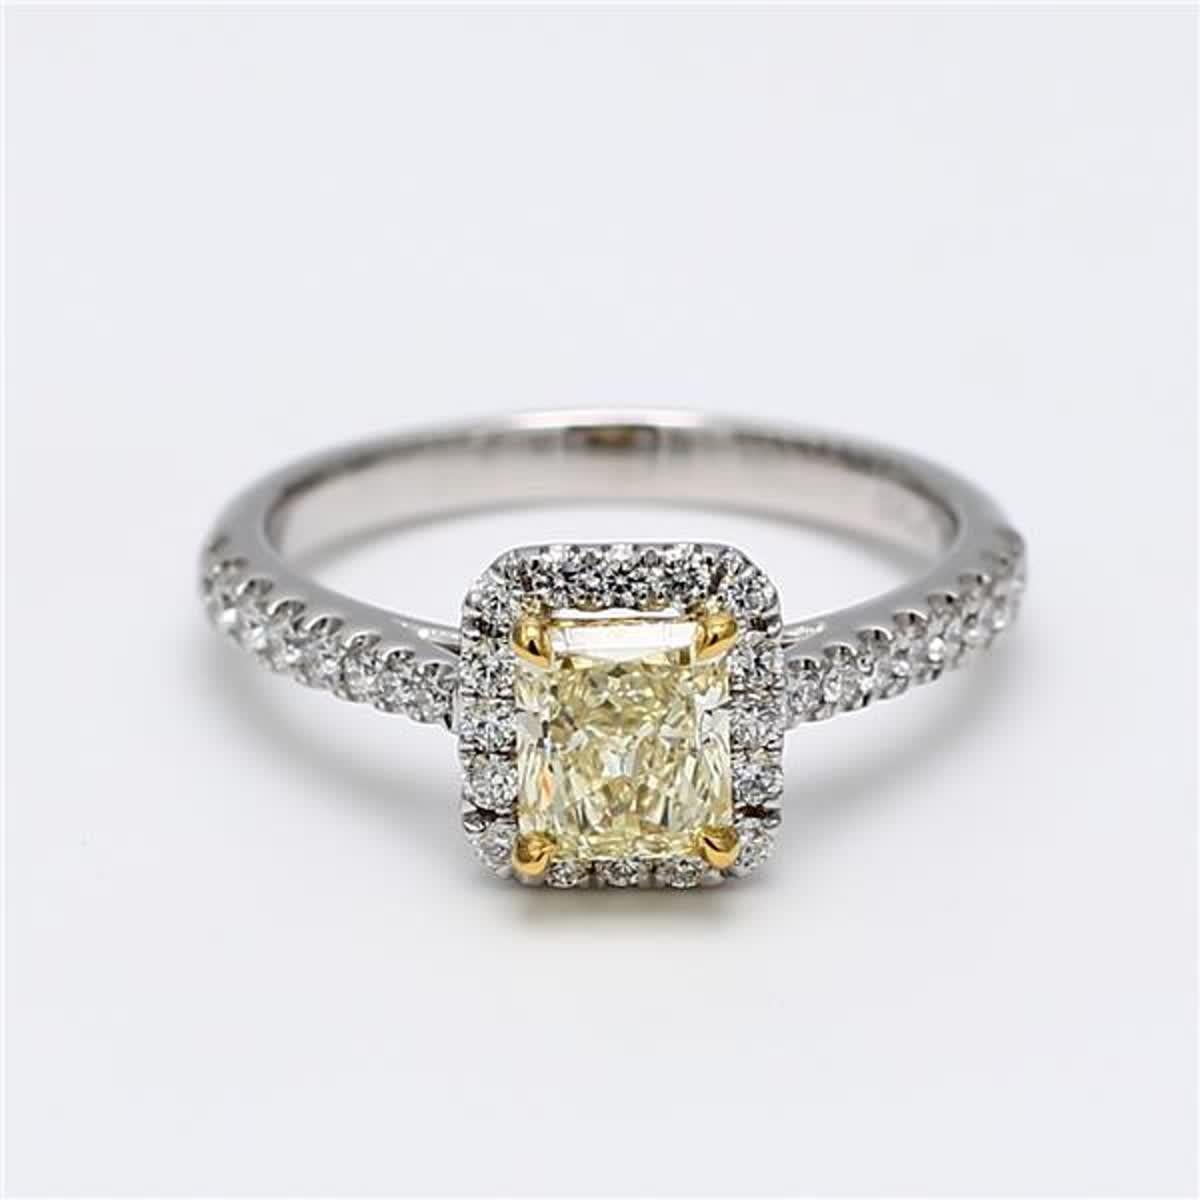 RareGemWorld's classic GIA certified diamond ring. Mounted in a beautiful 18K Yellow and White Gold and Platinum setting with a natural radiant cut yellow diamond. The yellow diamond is surrounded by small round natural white diamond melee. This